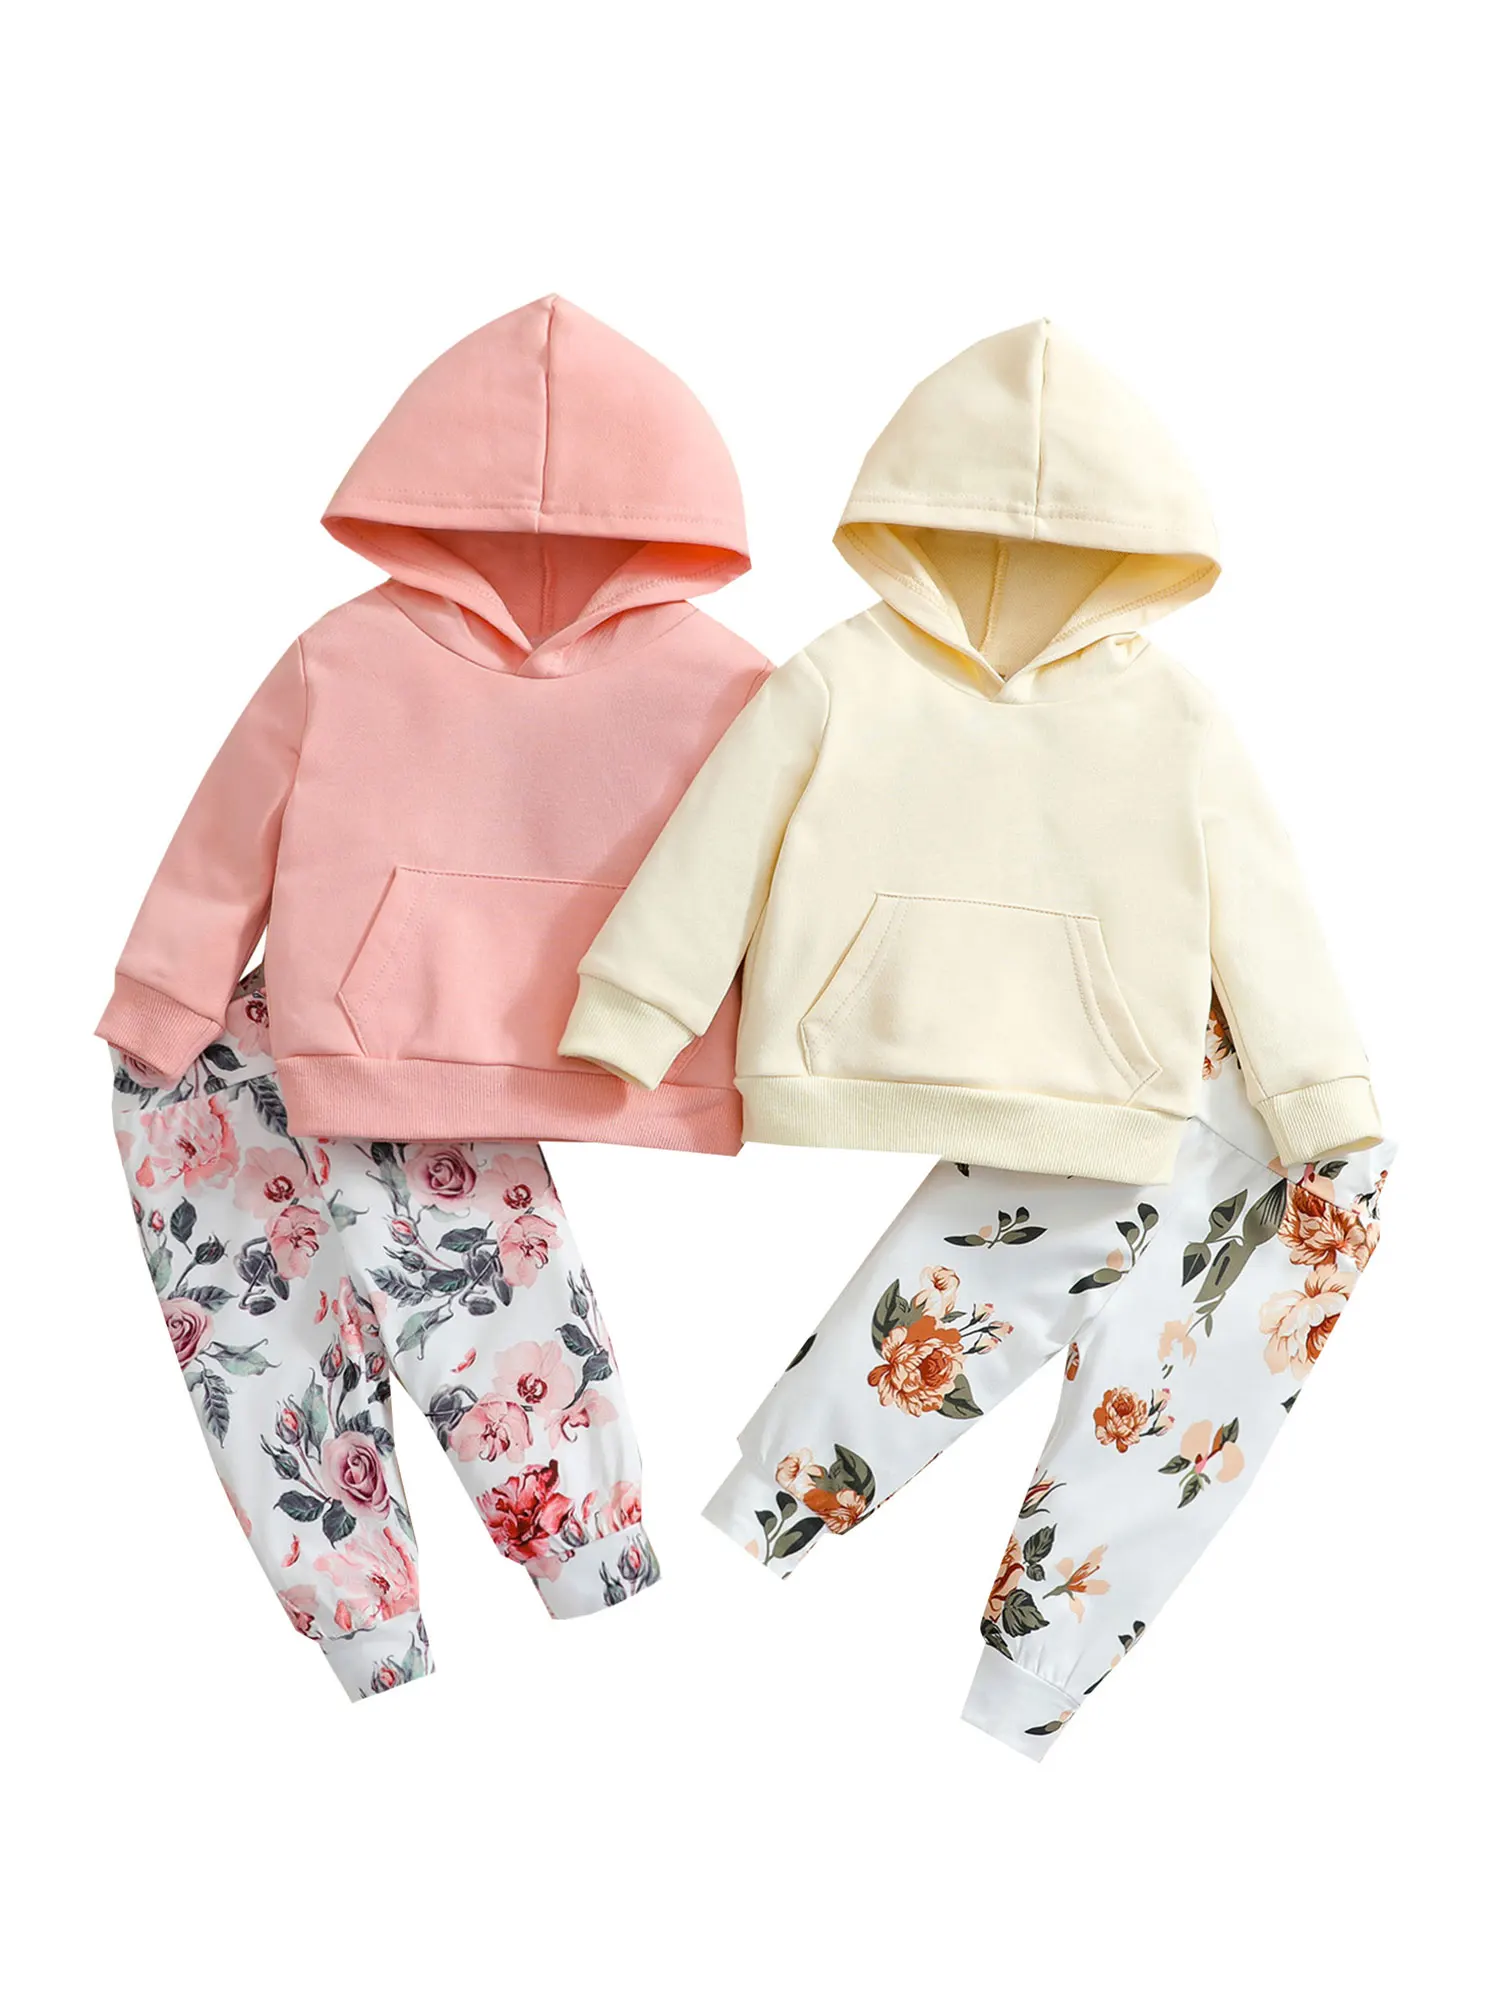 Ma&Baby 0-24M Newborn Toddler Infant Baby Girls Clothes Set Pocket Hooded Sweatshirt Top Rose Floral Pants Outfits DD40 baby dress set for girl